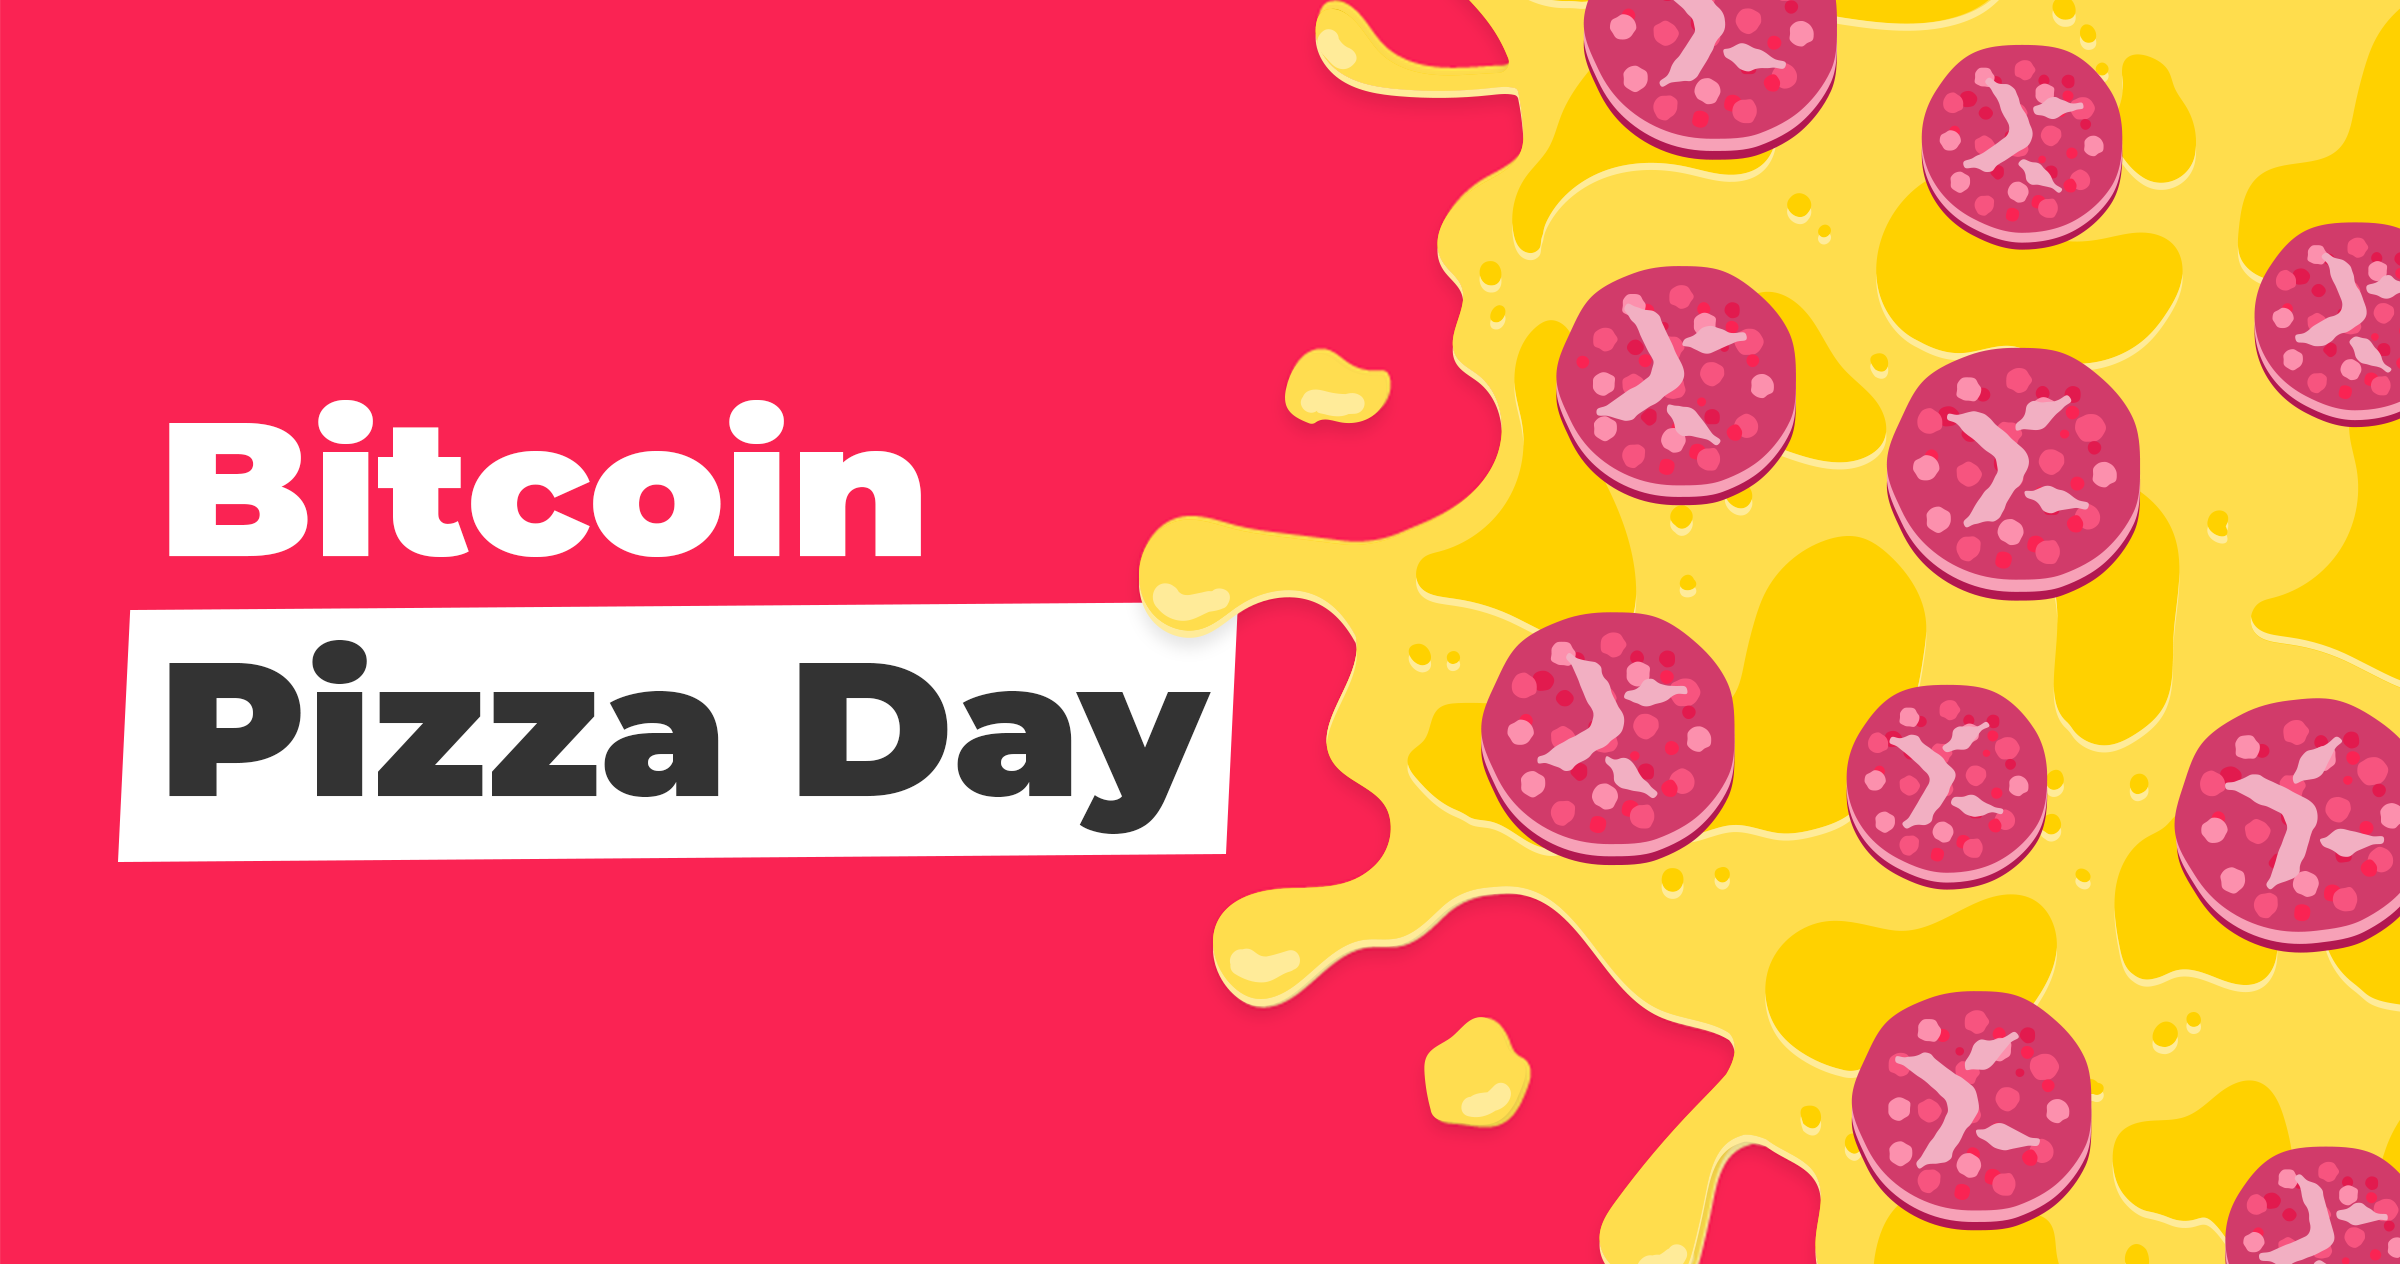 Bitcoin Pizza Day The Day 10,000 Bitcoins Bought 2 Pizzas StormX